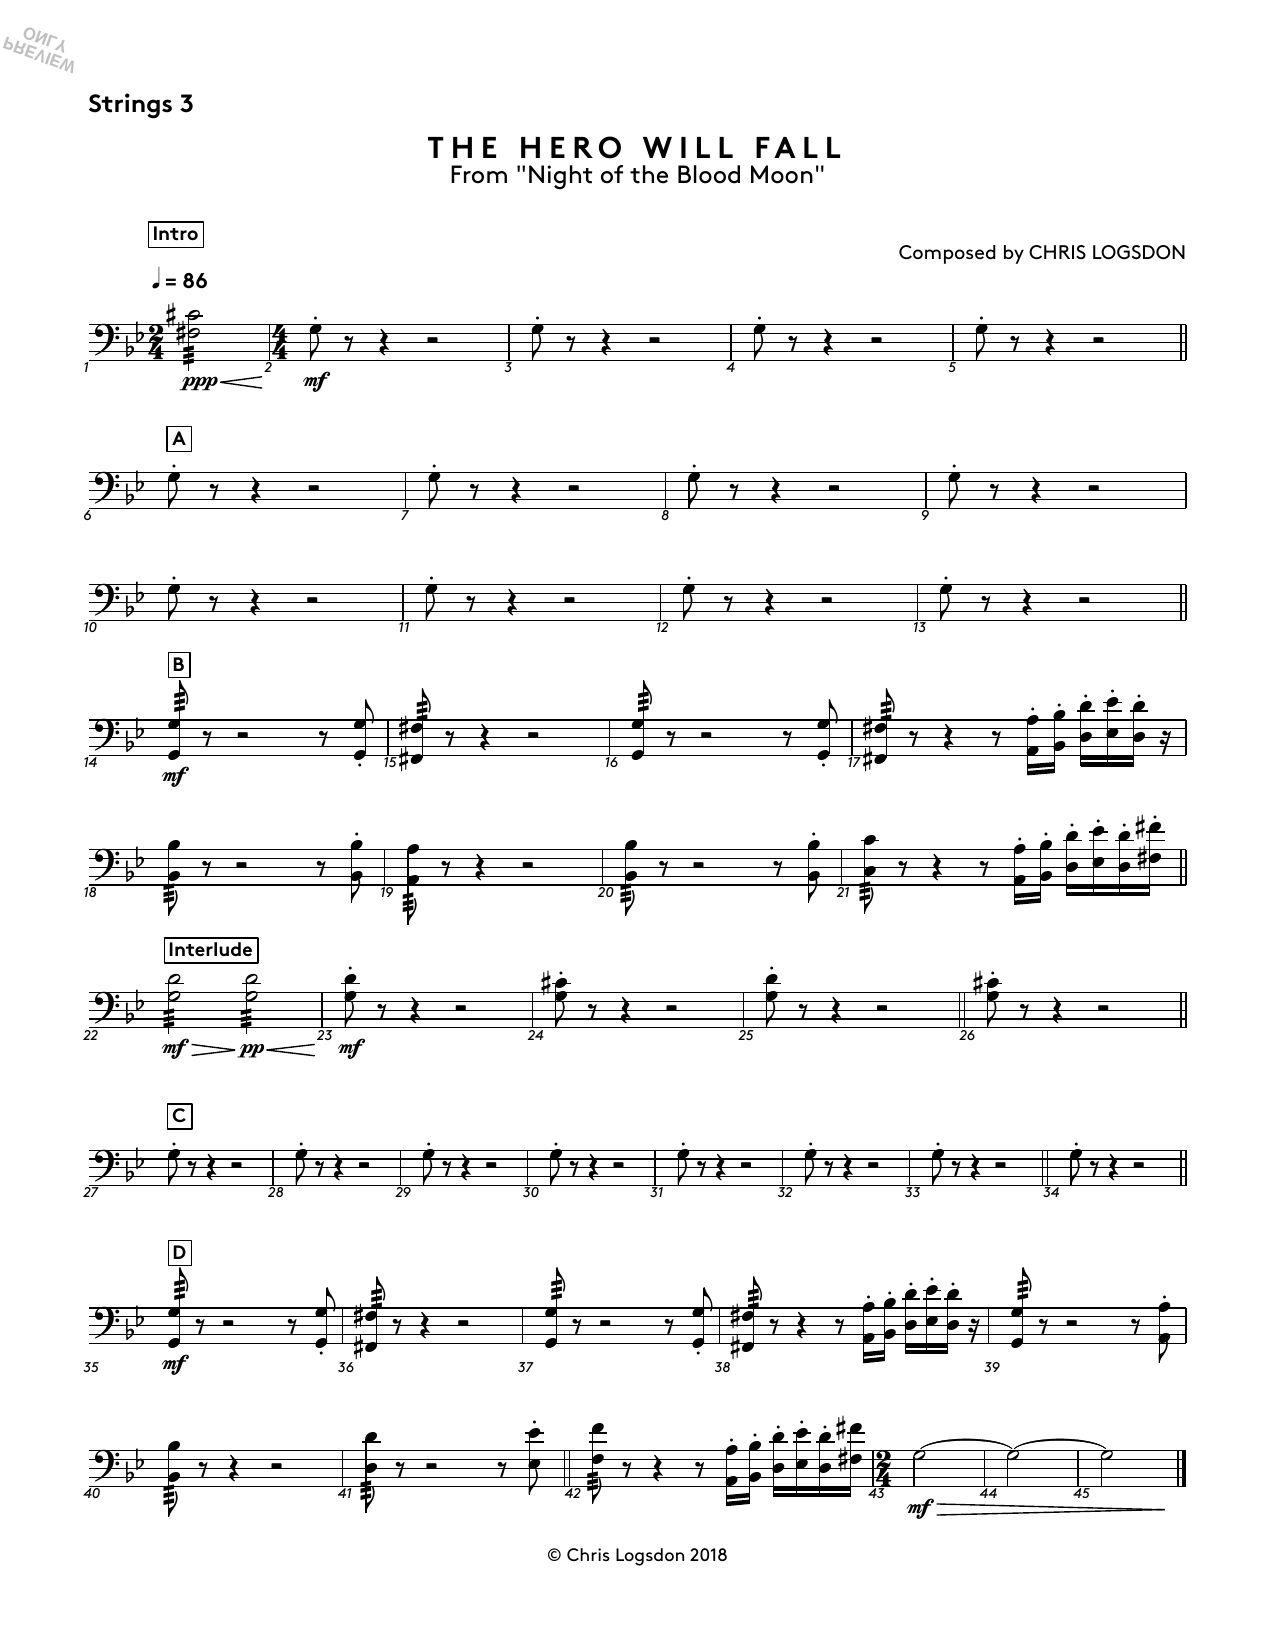 Chris Logsdon The Hero Will Fall (from Night of the Blood Moon) - Strings 3 sheet music notes and chords. Download Printable PDF.